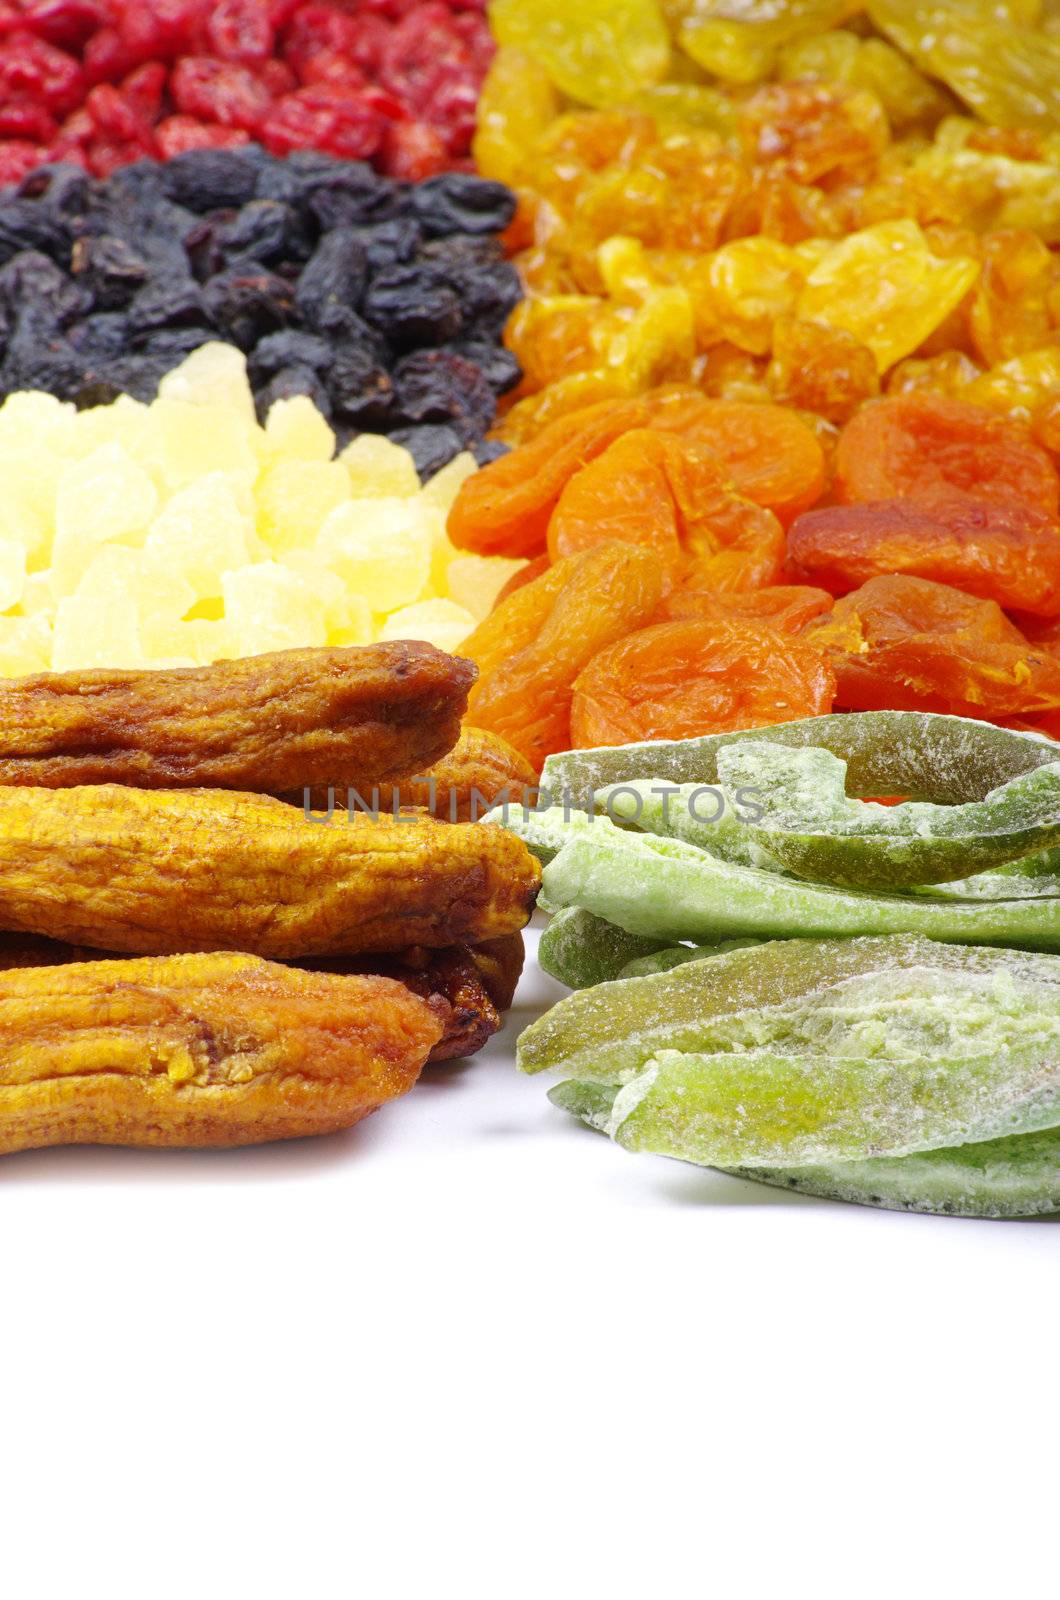 assortment dried fruits on white